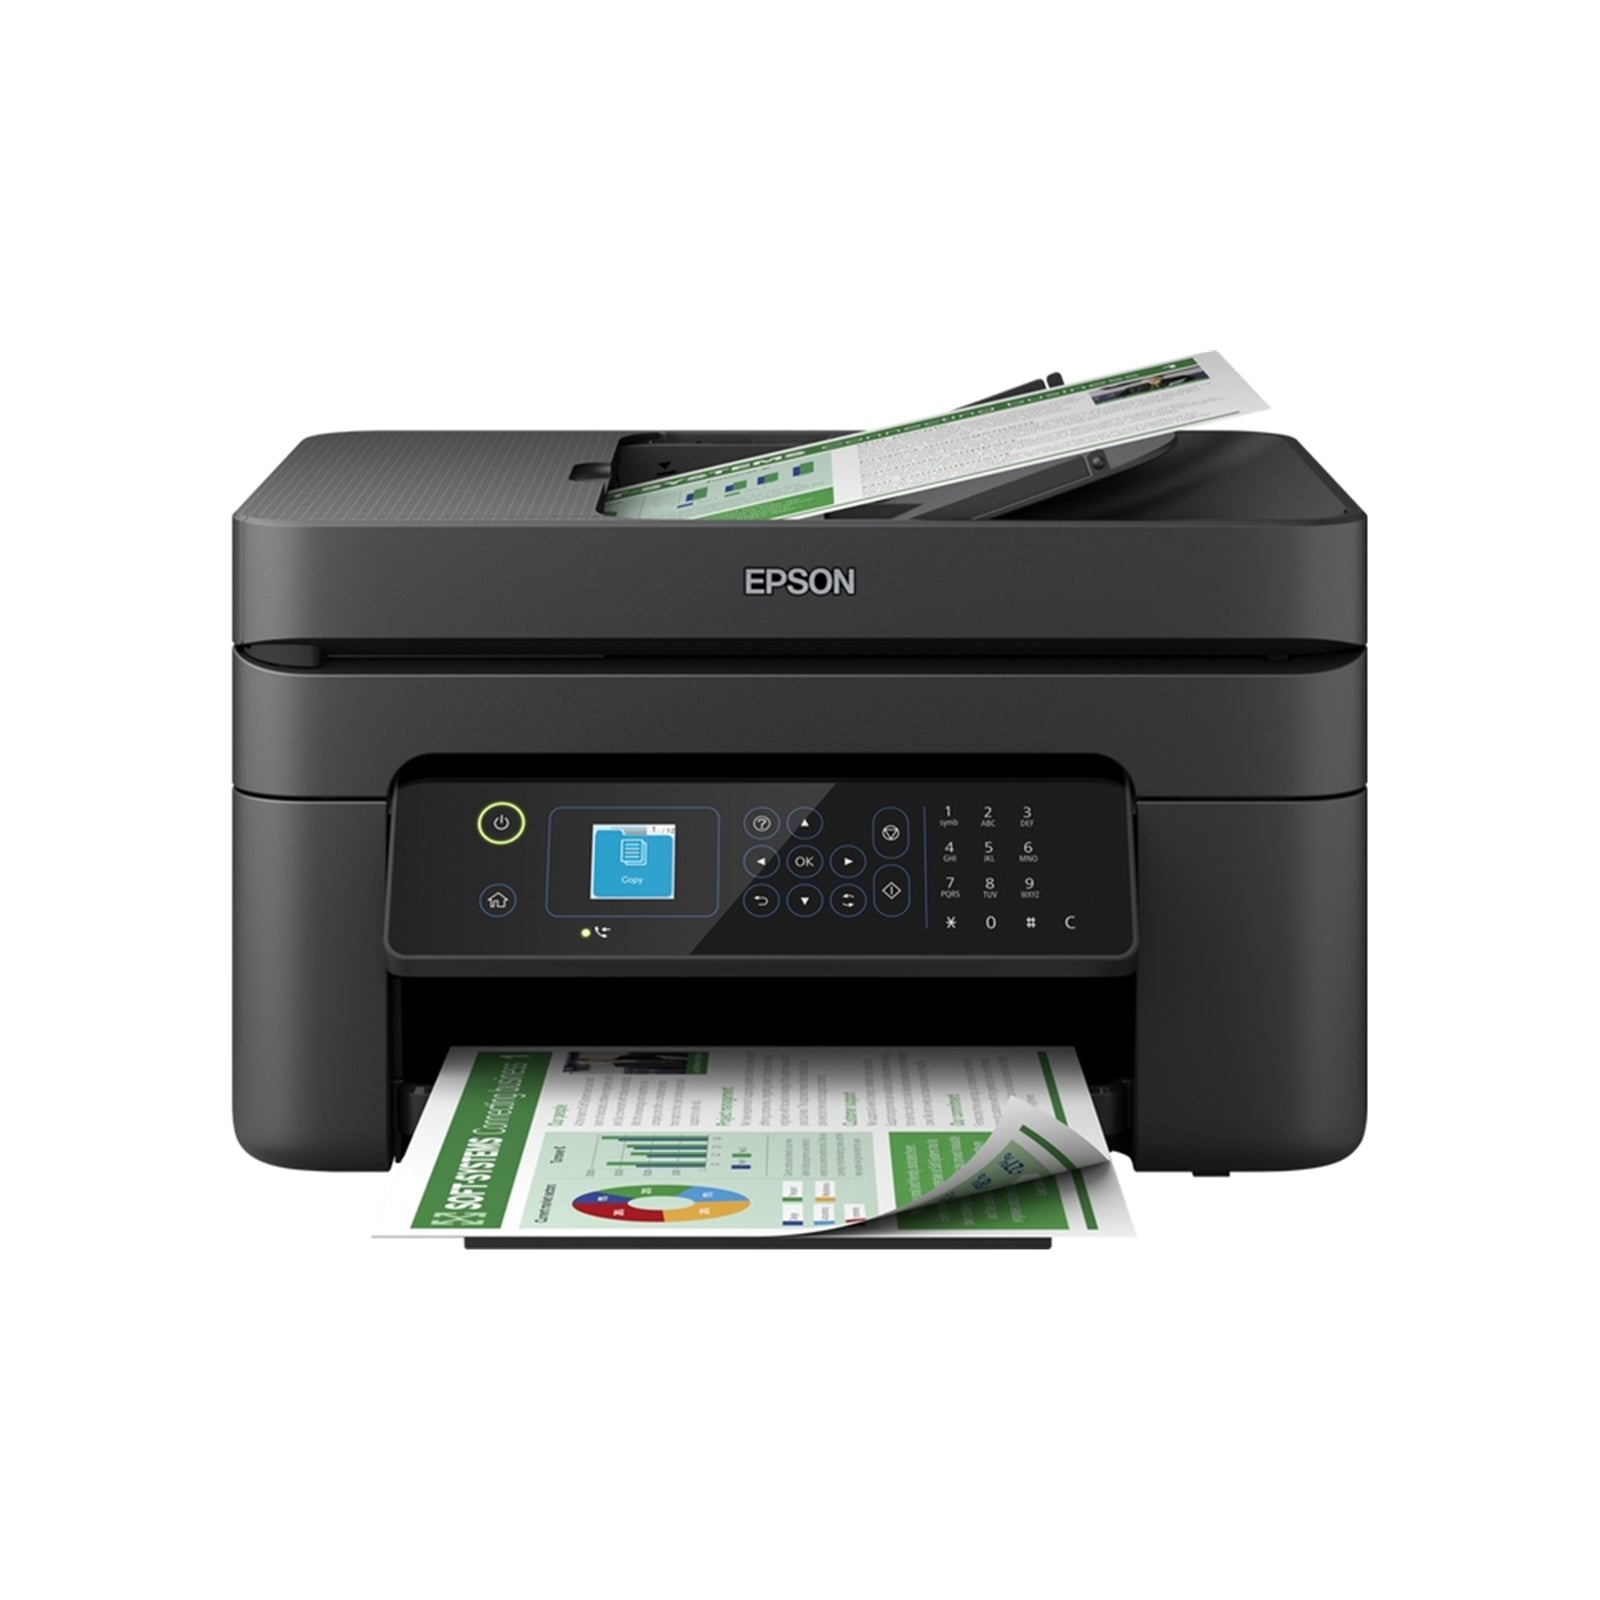 Epson WorkForce WF-2935DWF All-in-One Wireless Colour Inkjet Home and Office Printer with Duplex Printing, Fax, ADF and Mobile Printing